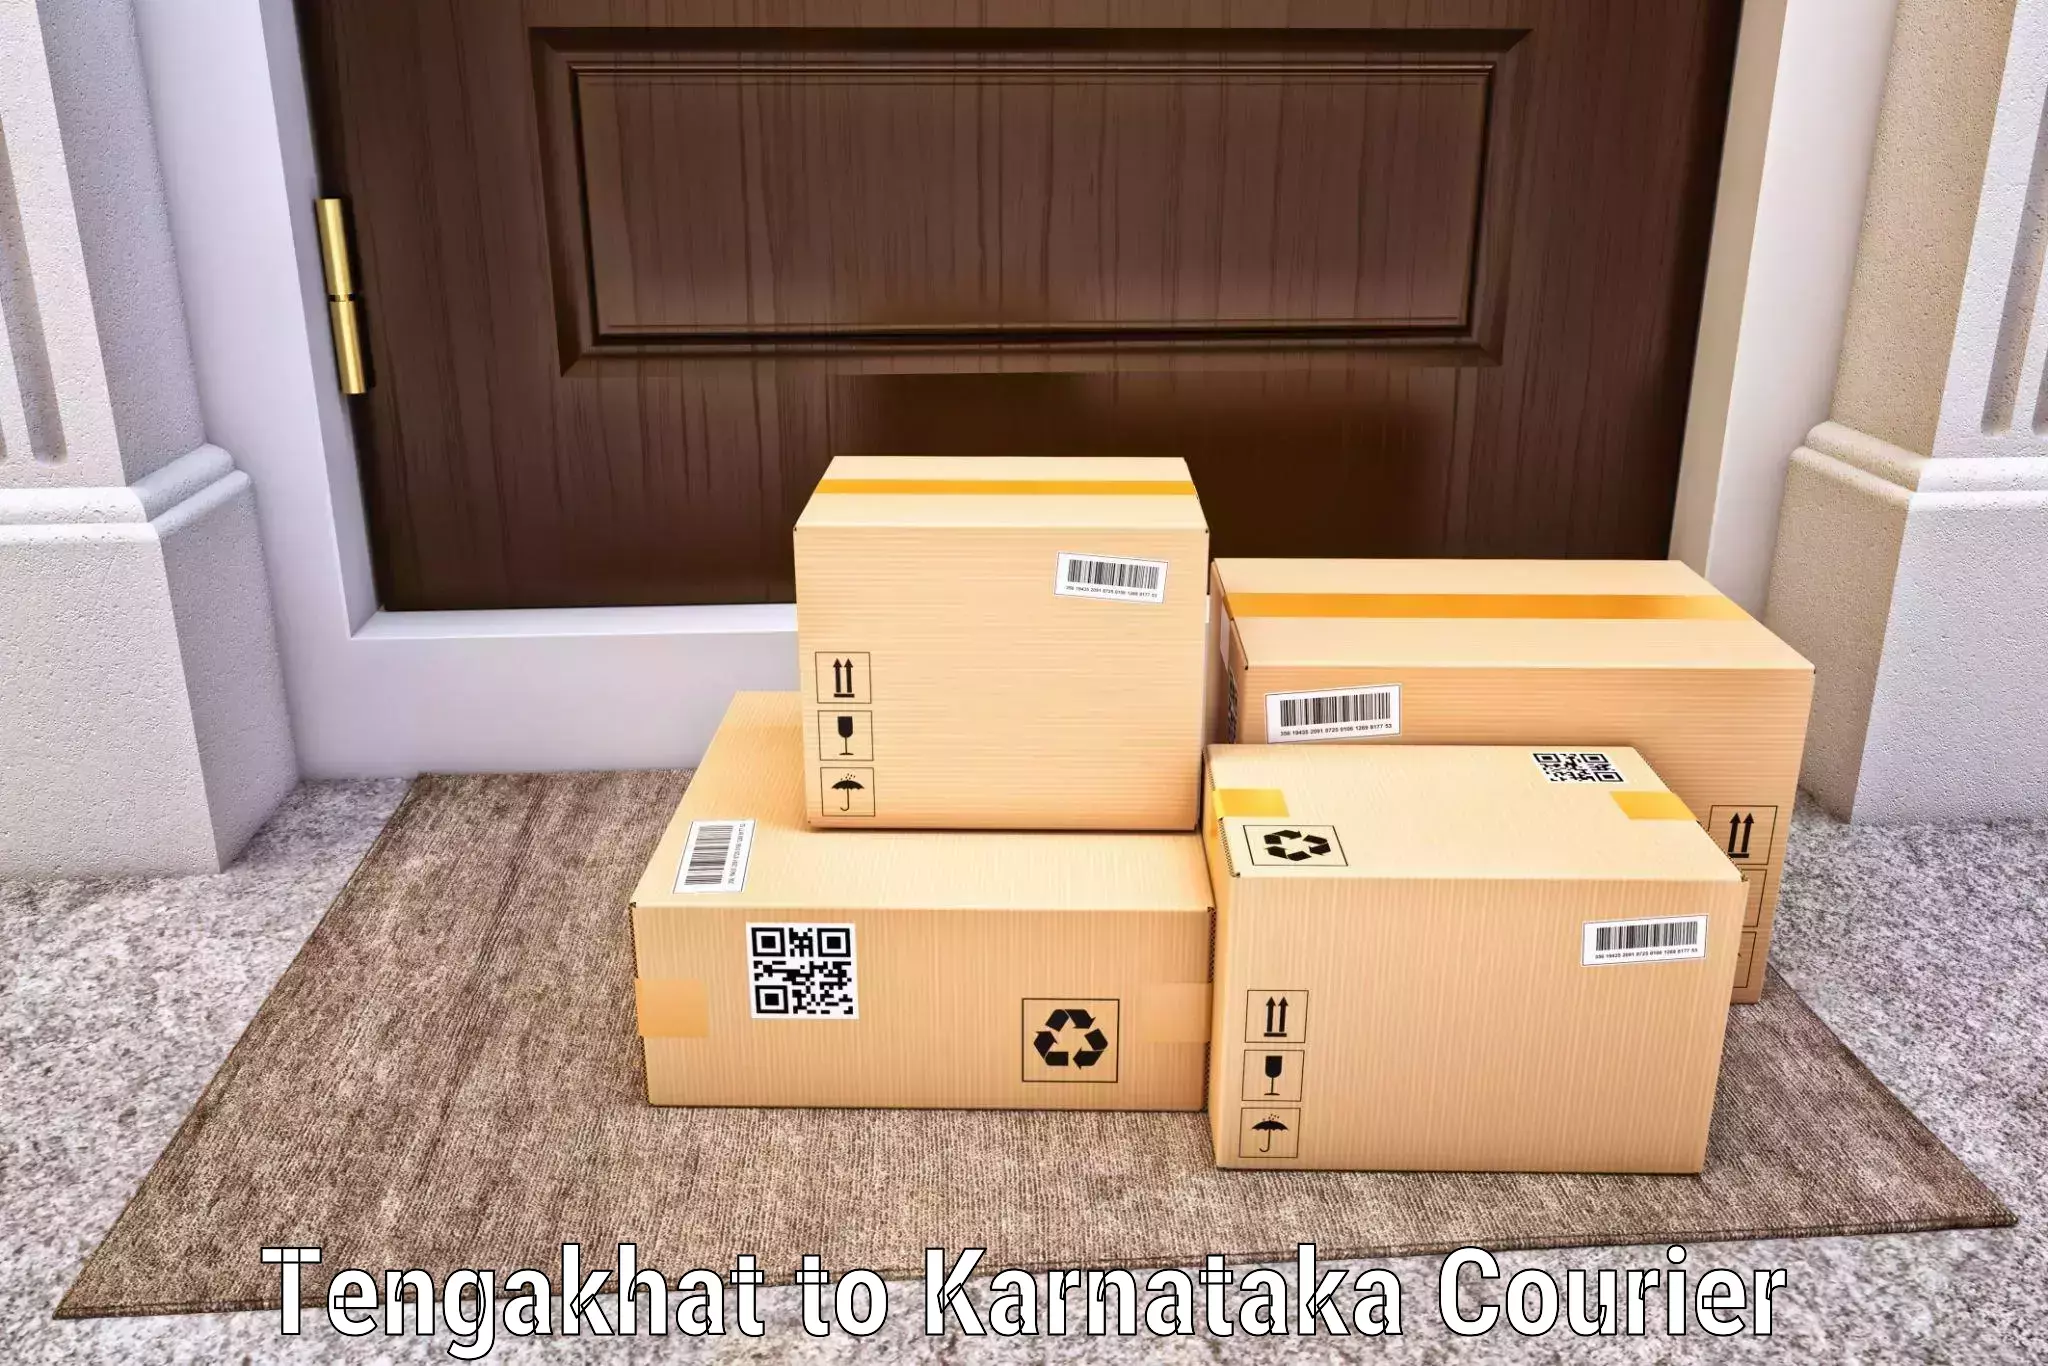 Courier app Tengakhat to Bangalore